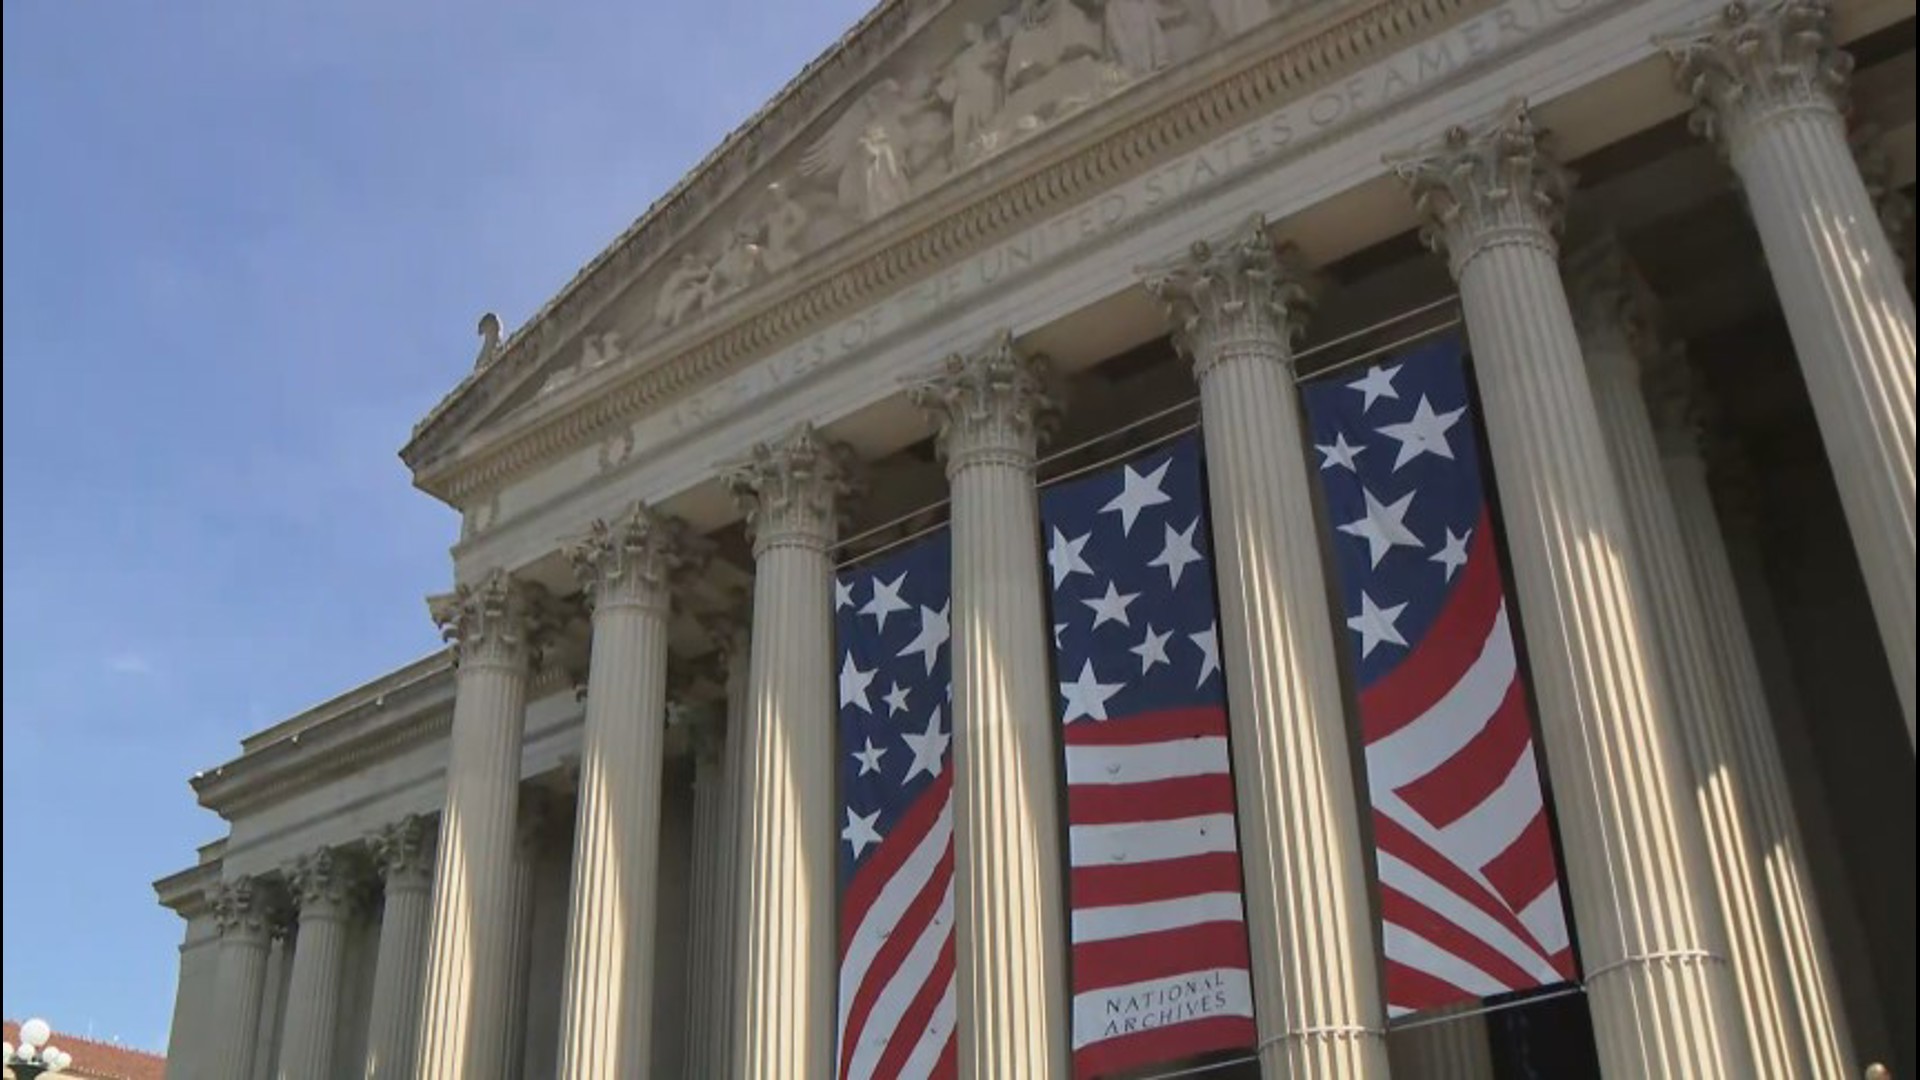 Party like it's 1776 with WUSA9's Allison Seymour at the National Archives.